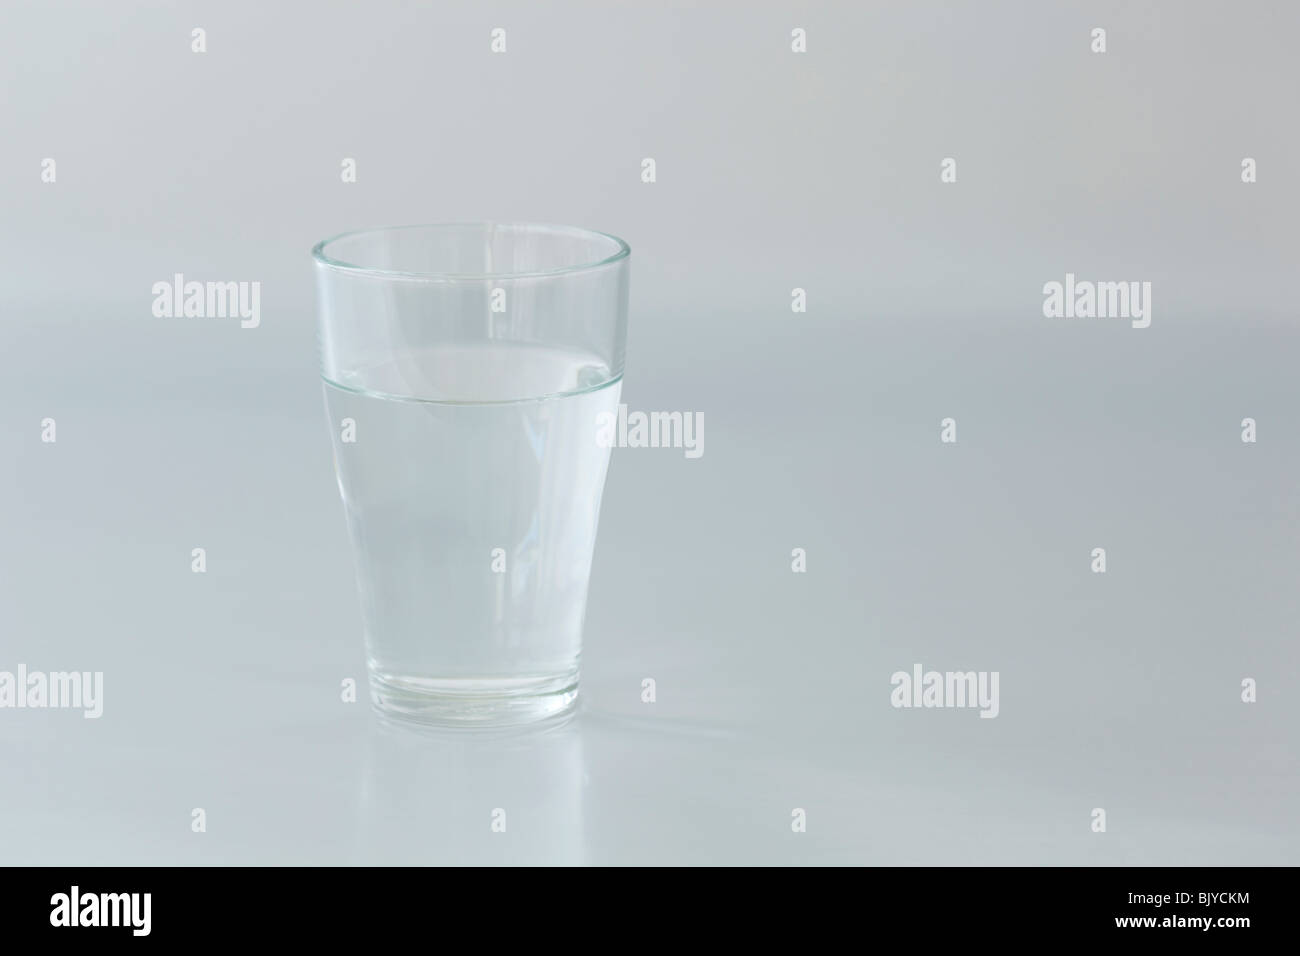 A glass of water Stock Photo